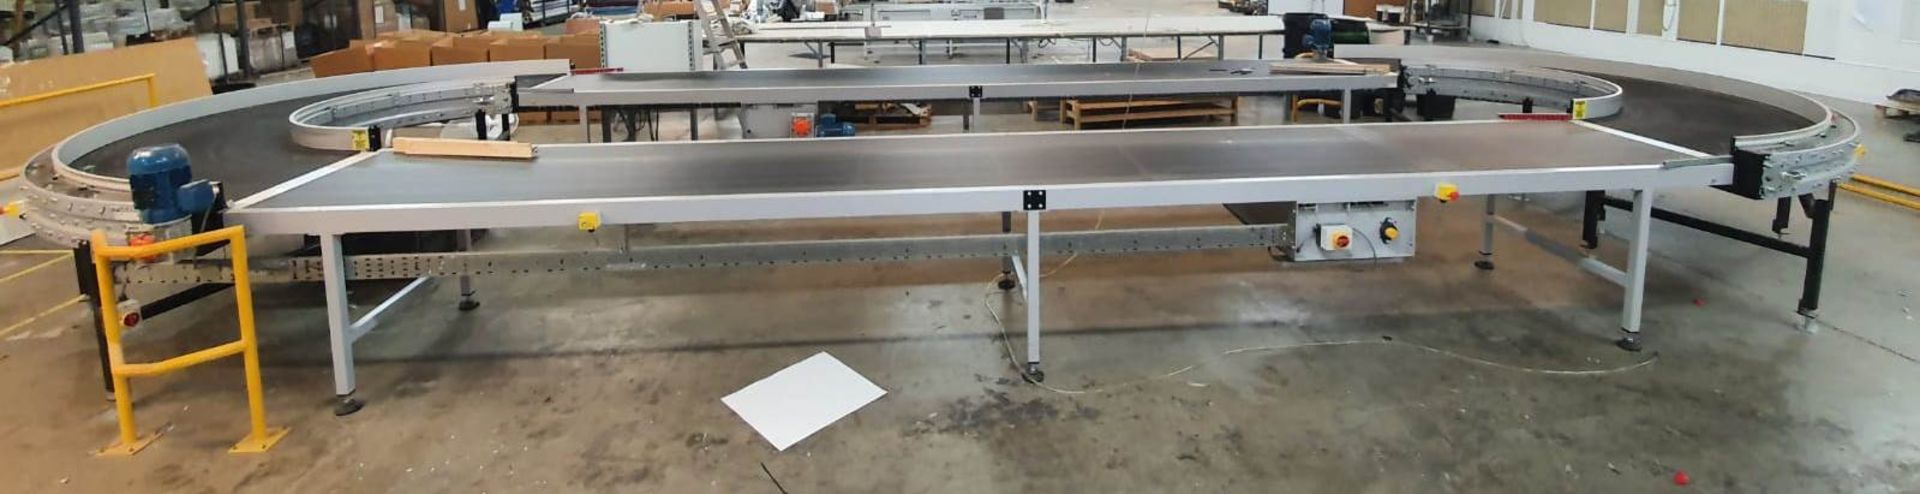 4 Sectional Belt Conveyor/Carousel System - Image 3 of 6